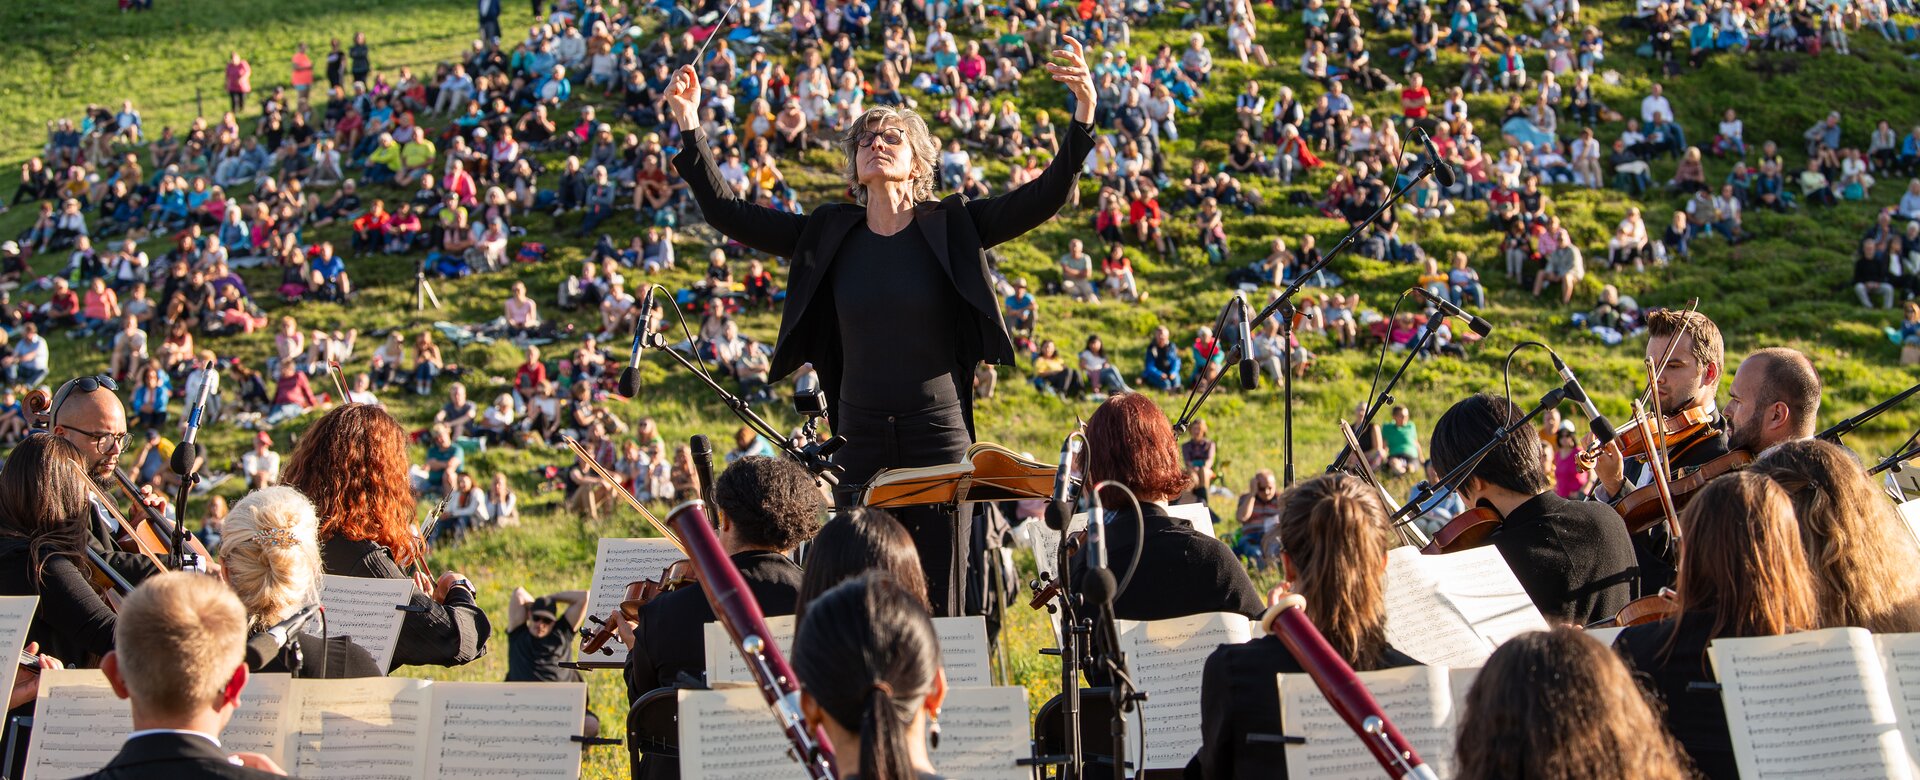 Conductor stands in front of the orchestra and behind him the audience sits on a meadow | © Gasteinertal Tourismus GmbH, Fotoatelier Wolkersdorfer 